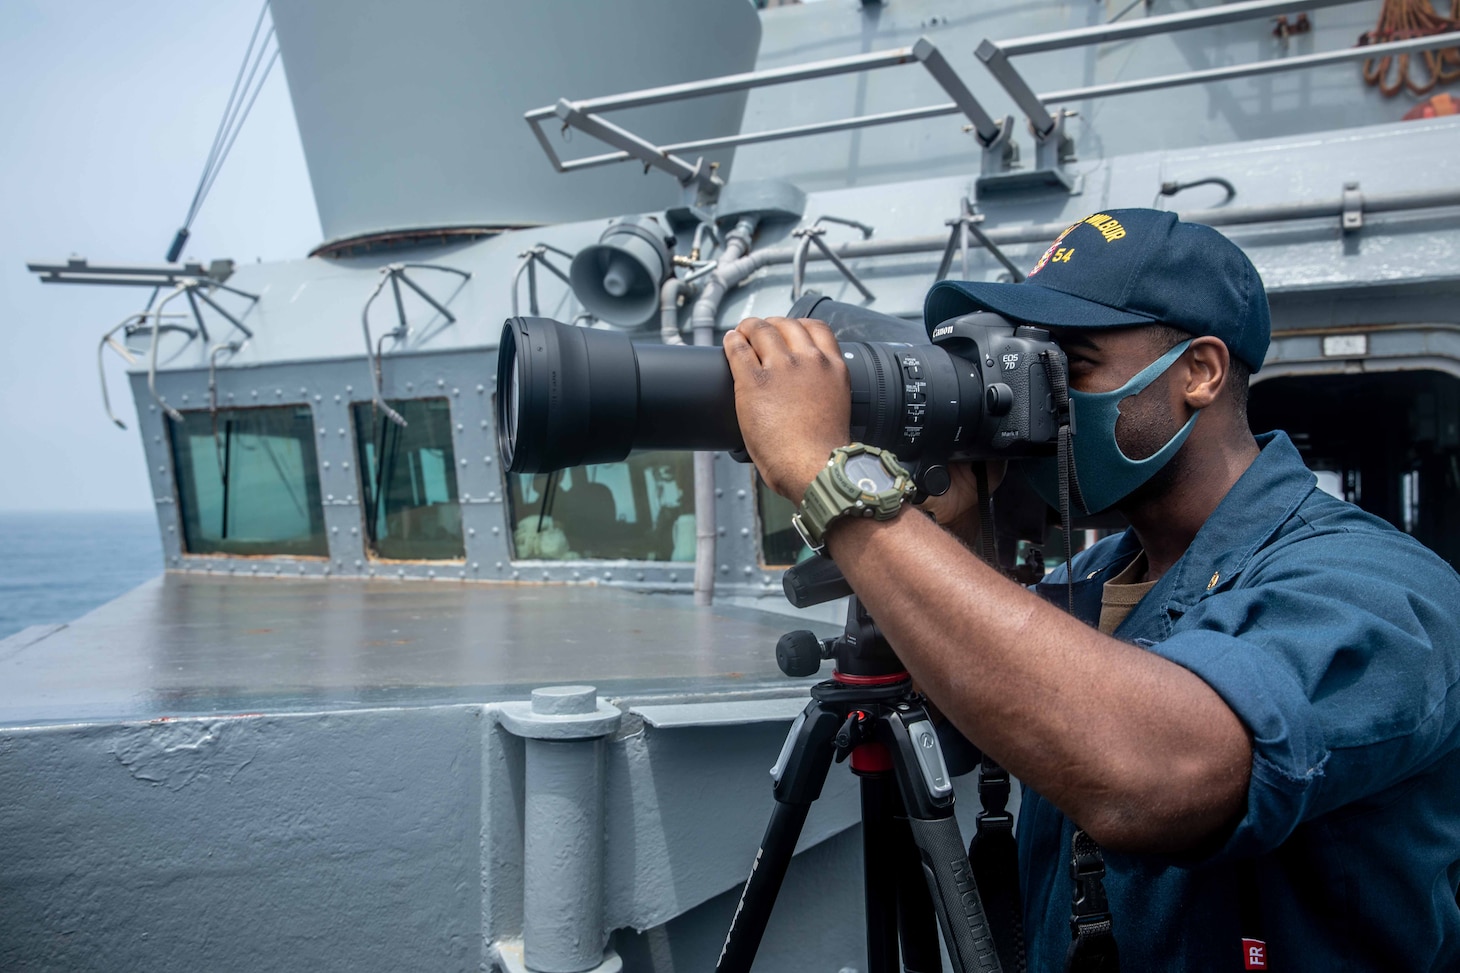 TAIWAN STRAIT (May 18, 2021) – Intelligence Specialist Chief Michael Tolbert, from Moss Point, Miss., stands watch on the bridge while the Arleigh Burke-class guided-missile destroyer USS Curtis Wilbur (DDG 54) conducts routine operations. Curtis Wilbur is assigned to Commander, Task Force 71/Destroyer Squadron (DESRON) 15, the Navy’s largest forward DESRON and the U.S. 7th Fleet’s principal surface force. (U.S. Navy photo by Mass Communication Specialist 3rd Class Zenaida Roth)